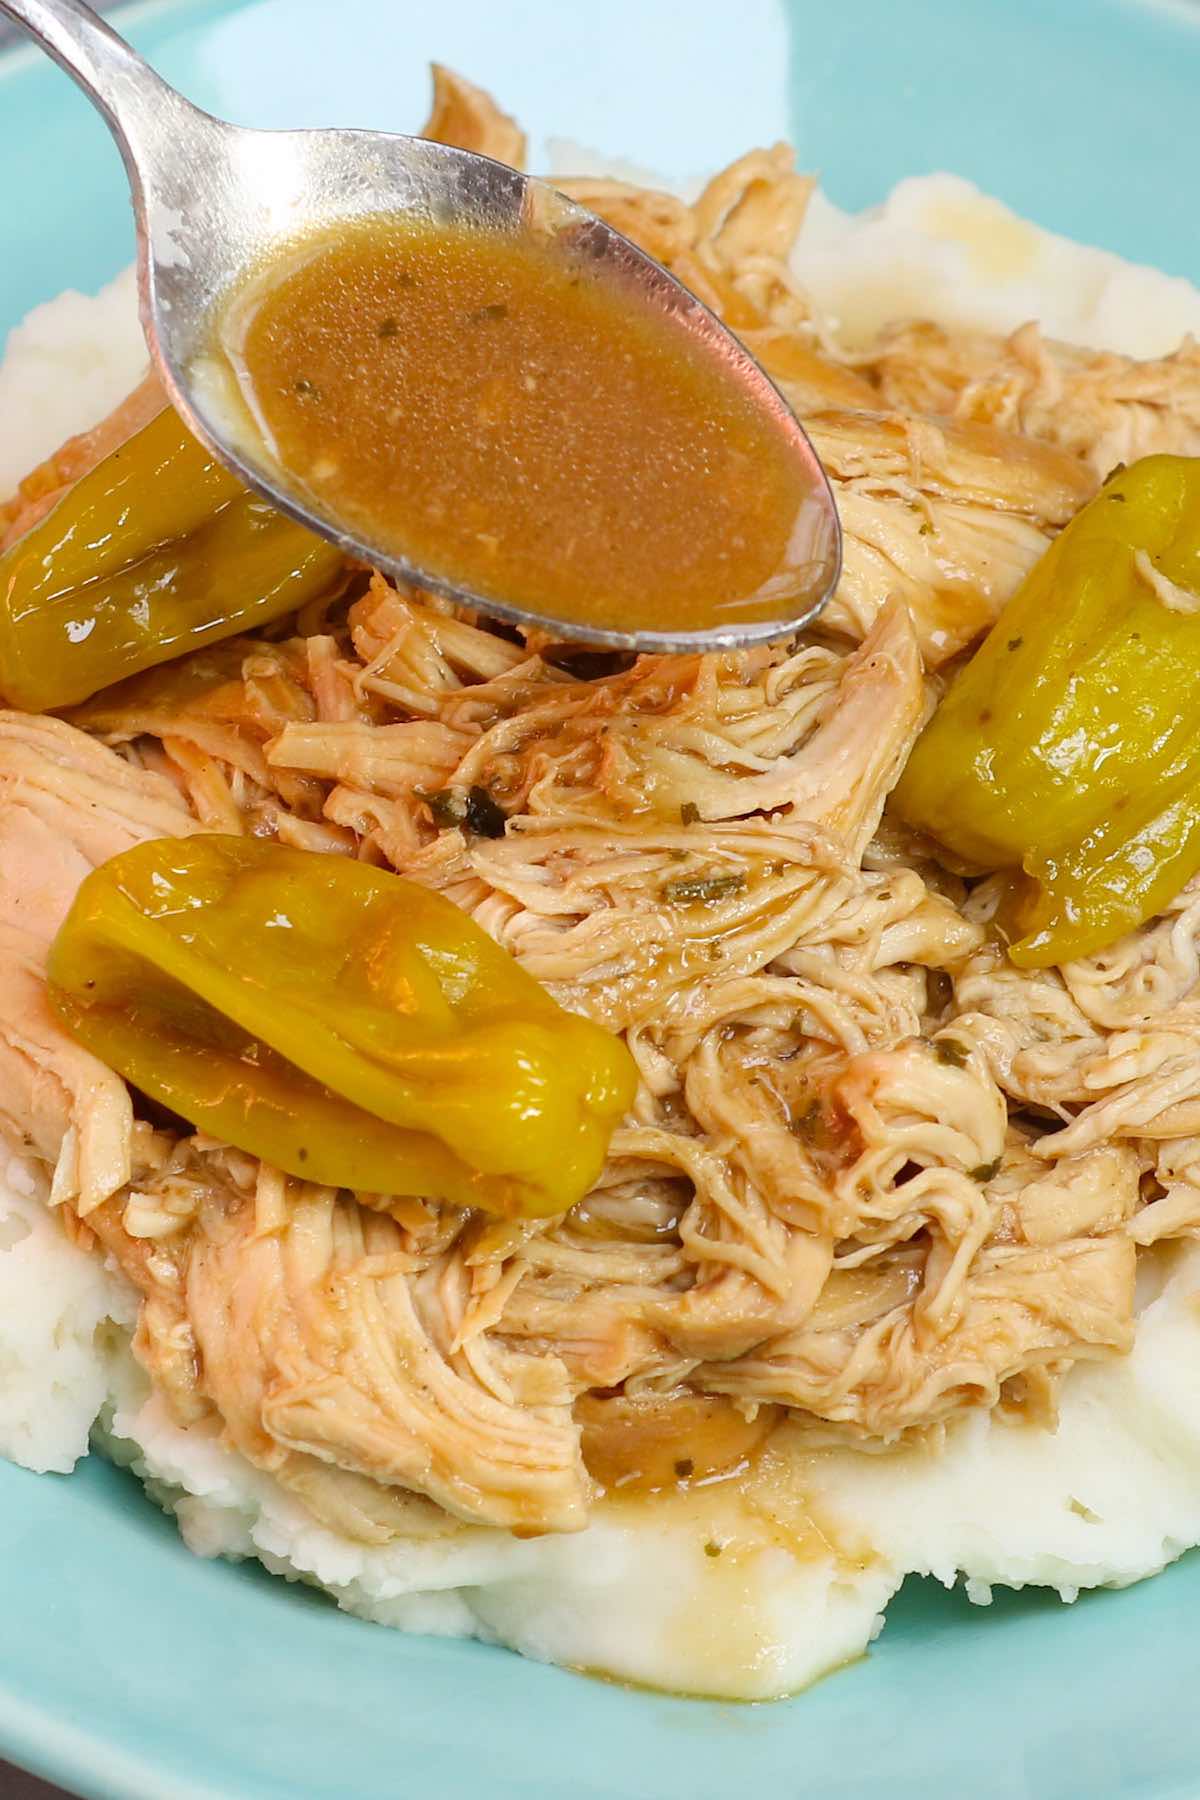 Spooning juices from the slow cooker onto the shredded chicken